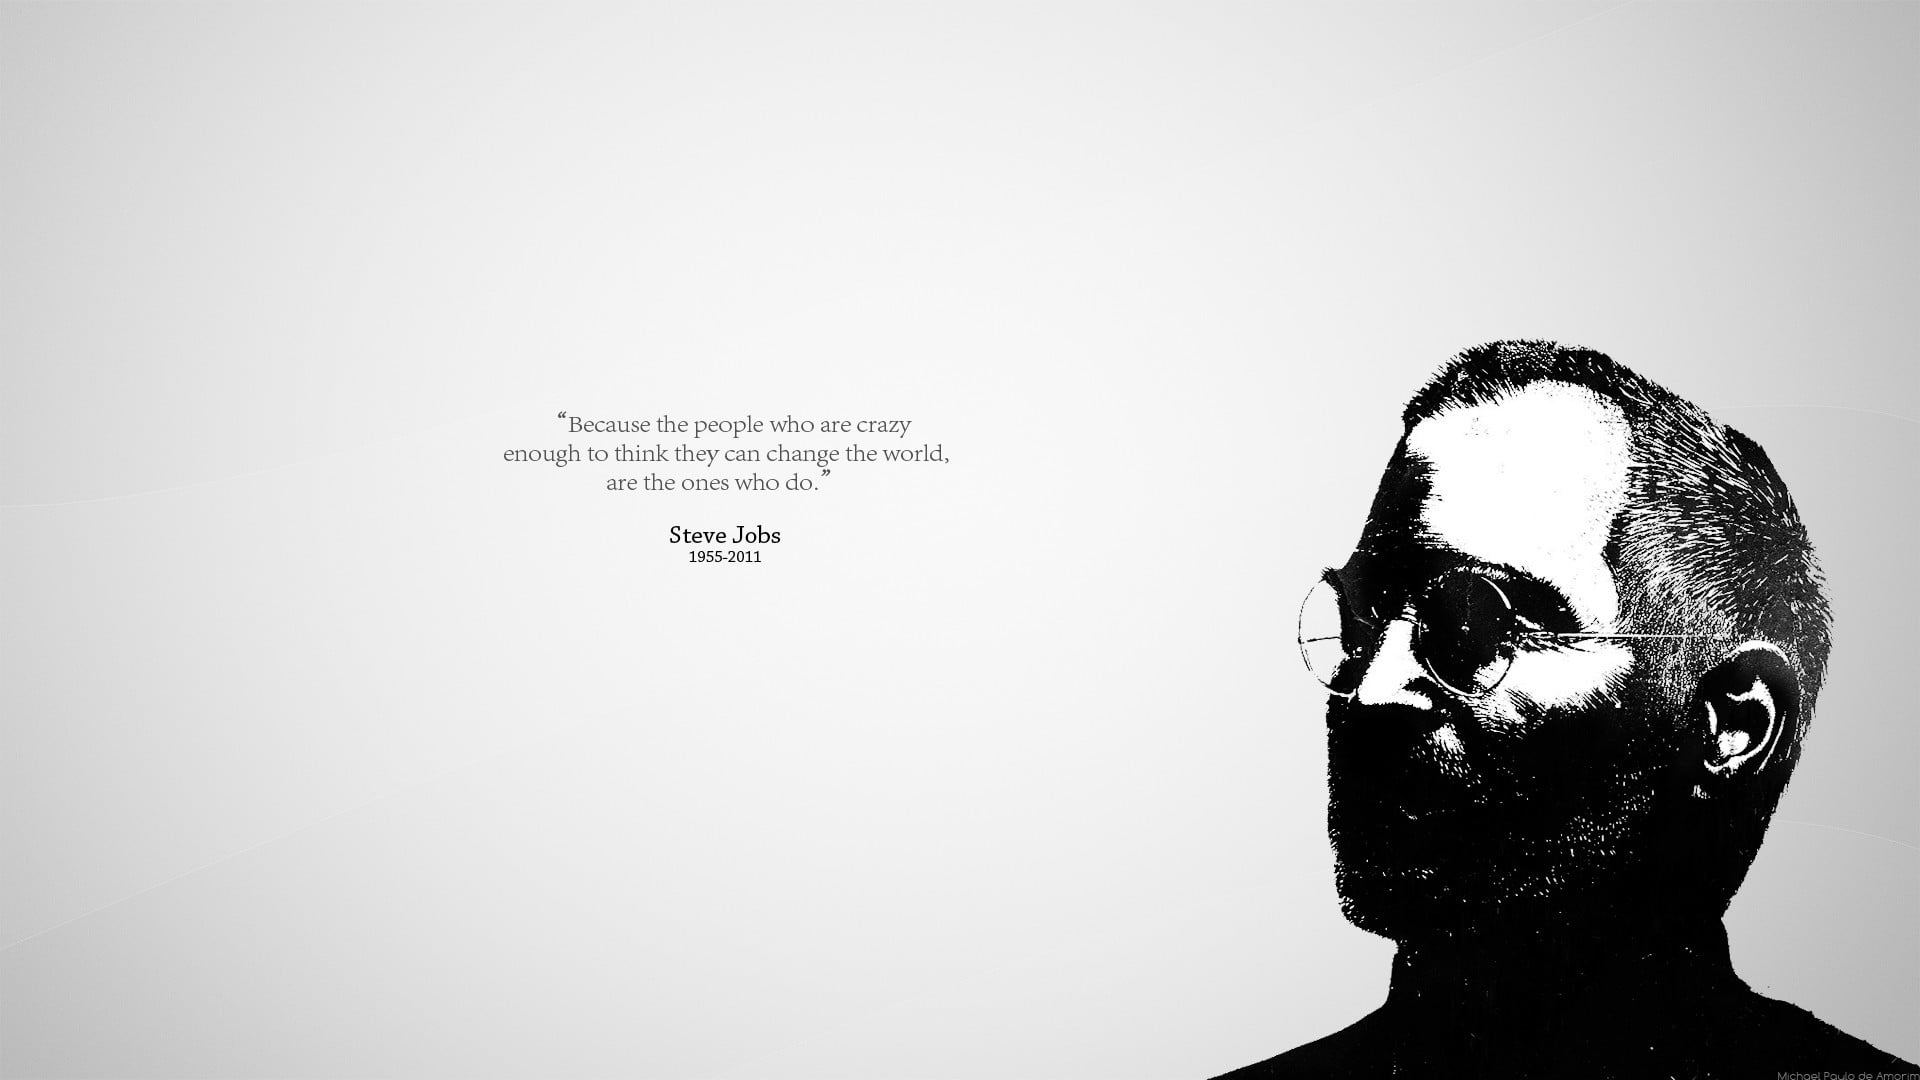 Steve Jobs illustration with text overlay, quote, simple background